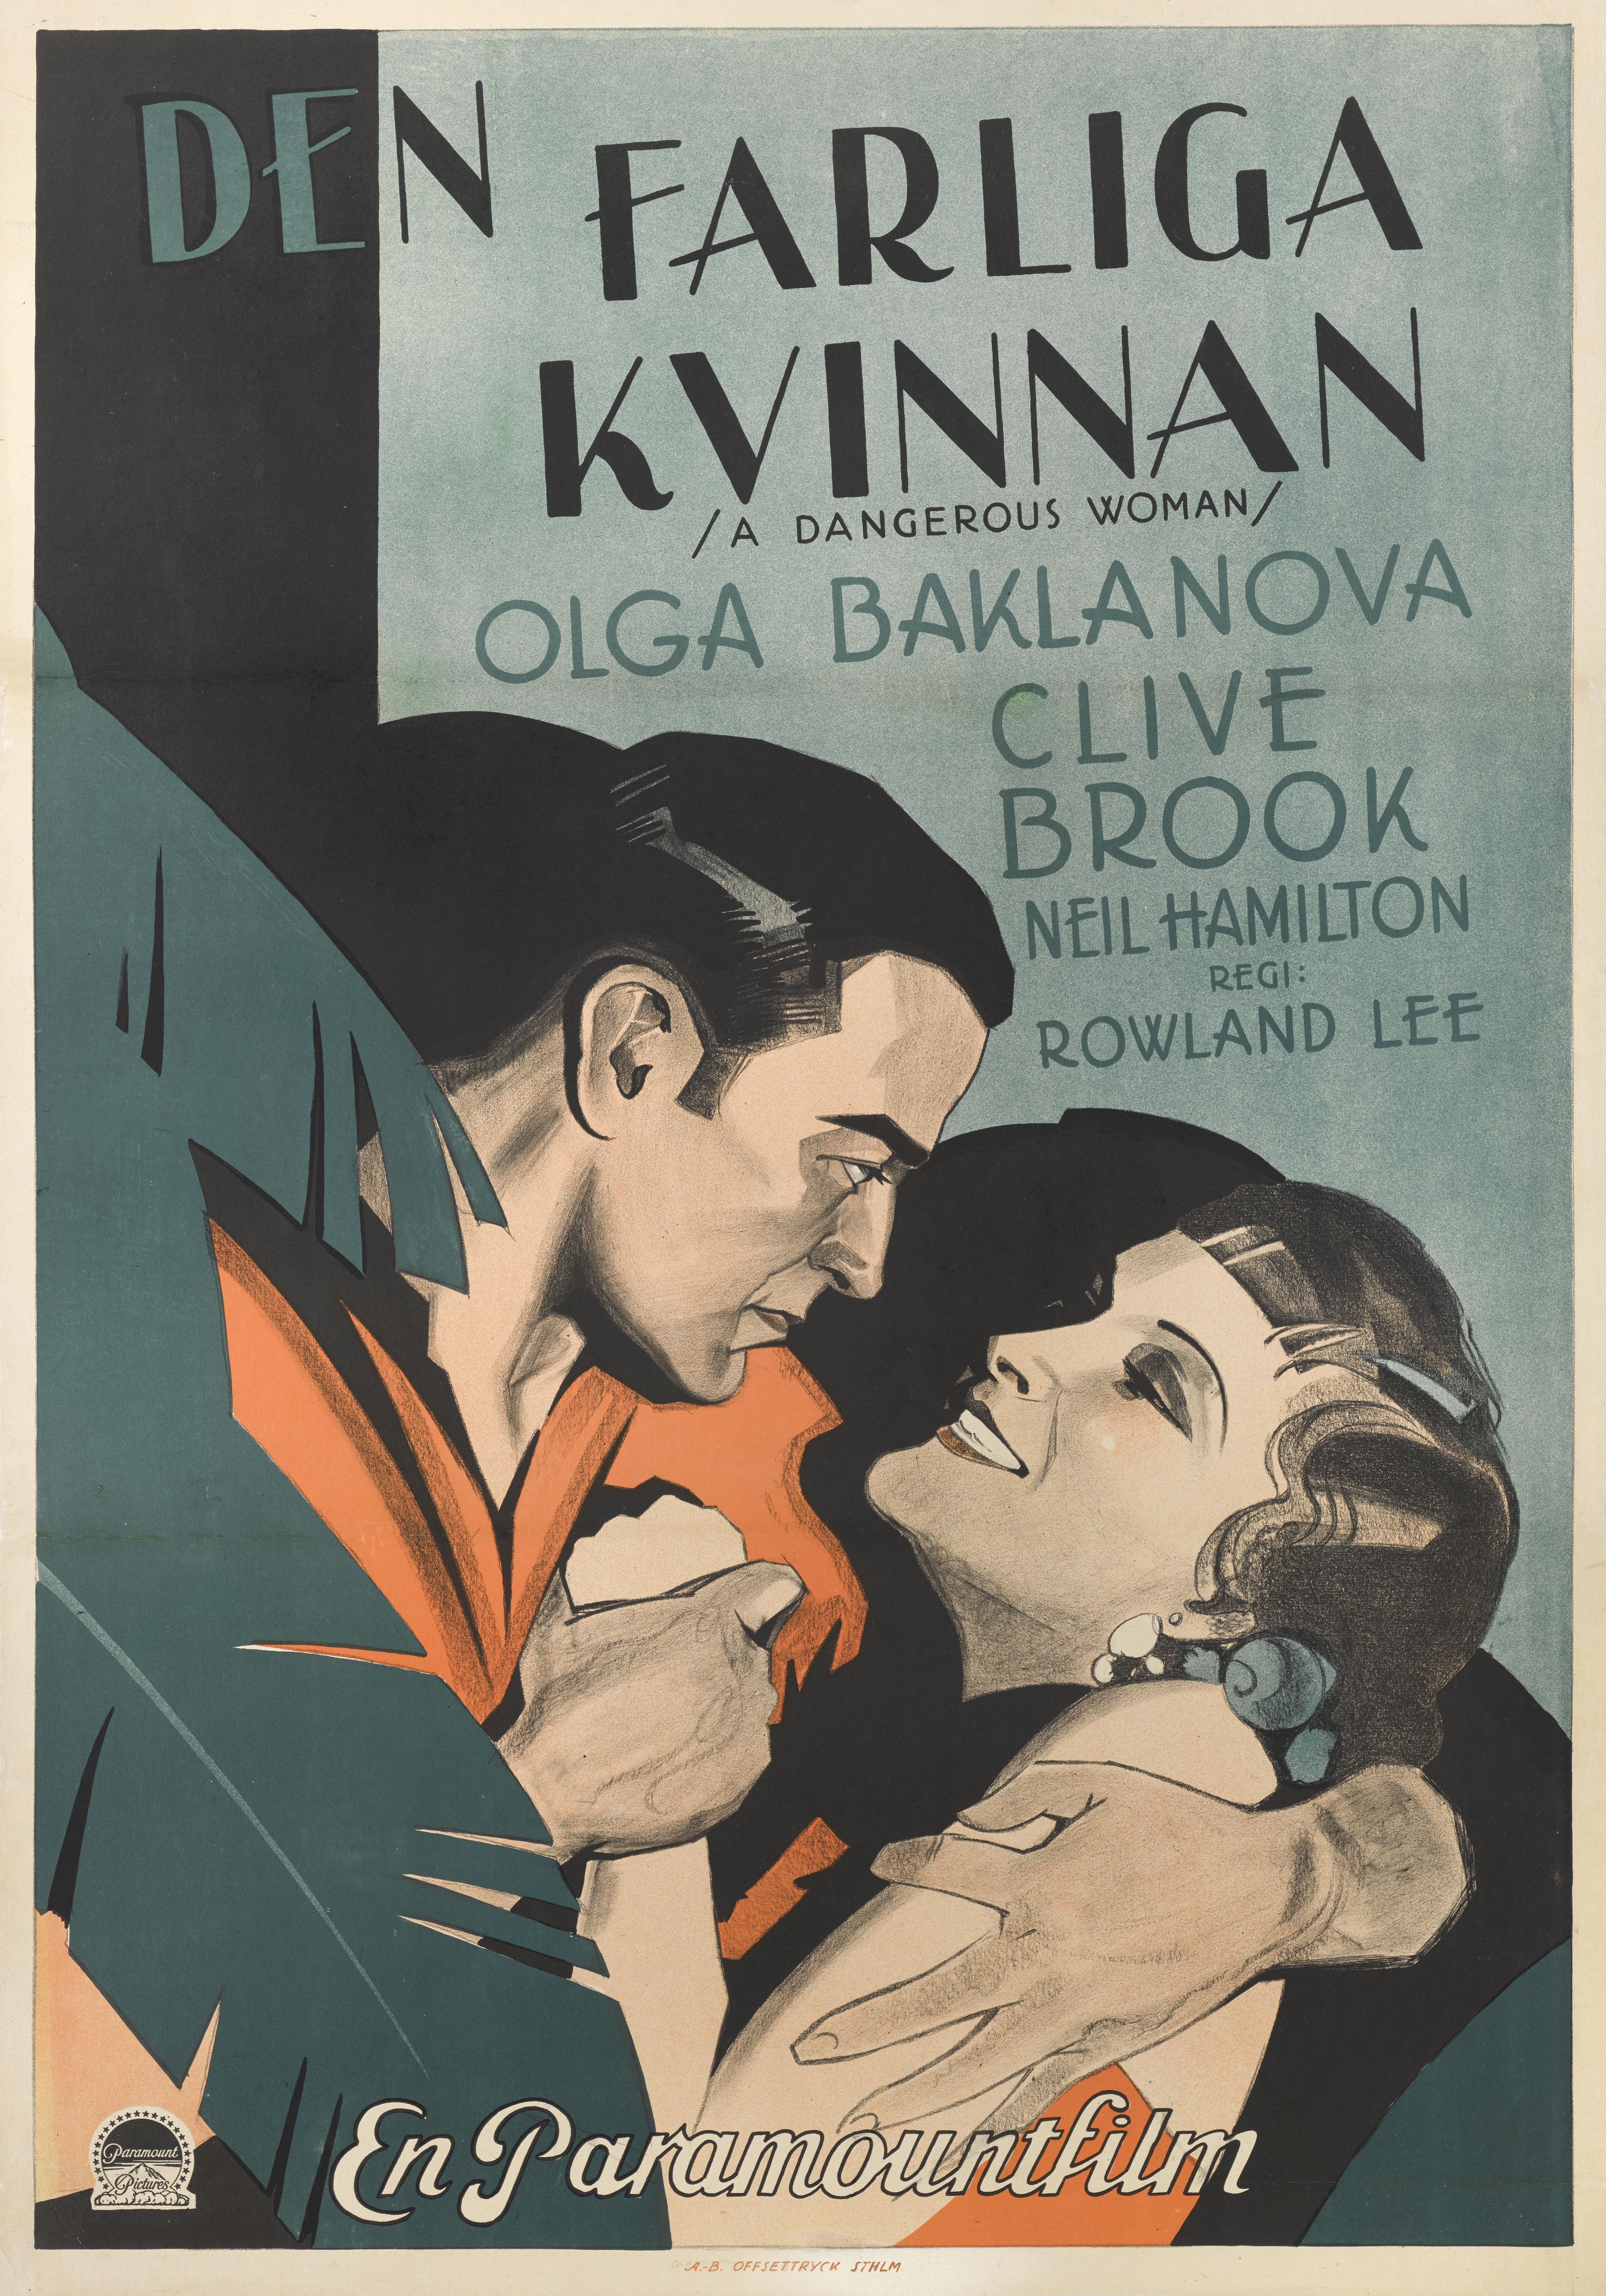 Original Swedish film poster for the 1929 American drama film A Dangerous Woman.
The film was directed by Gerald Grove and Rowland V. Lee and starred Clive Brook and Olge Baclanova
This Swedish poster was created for the films first Swedish